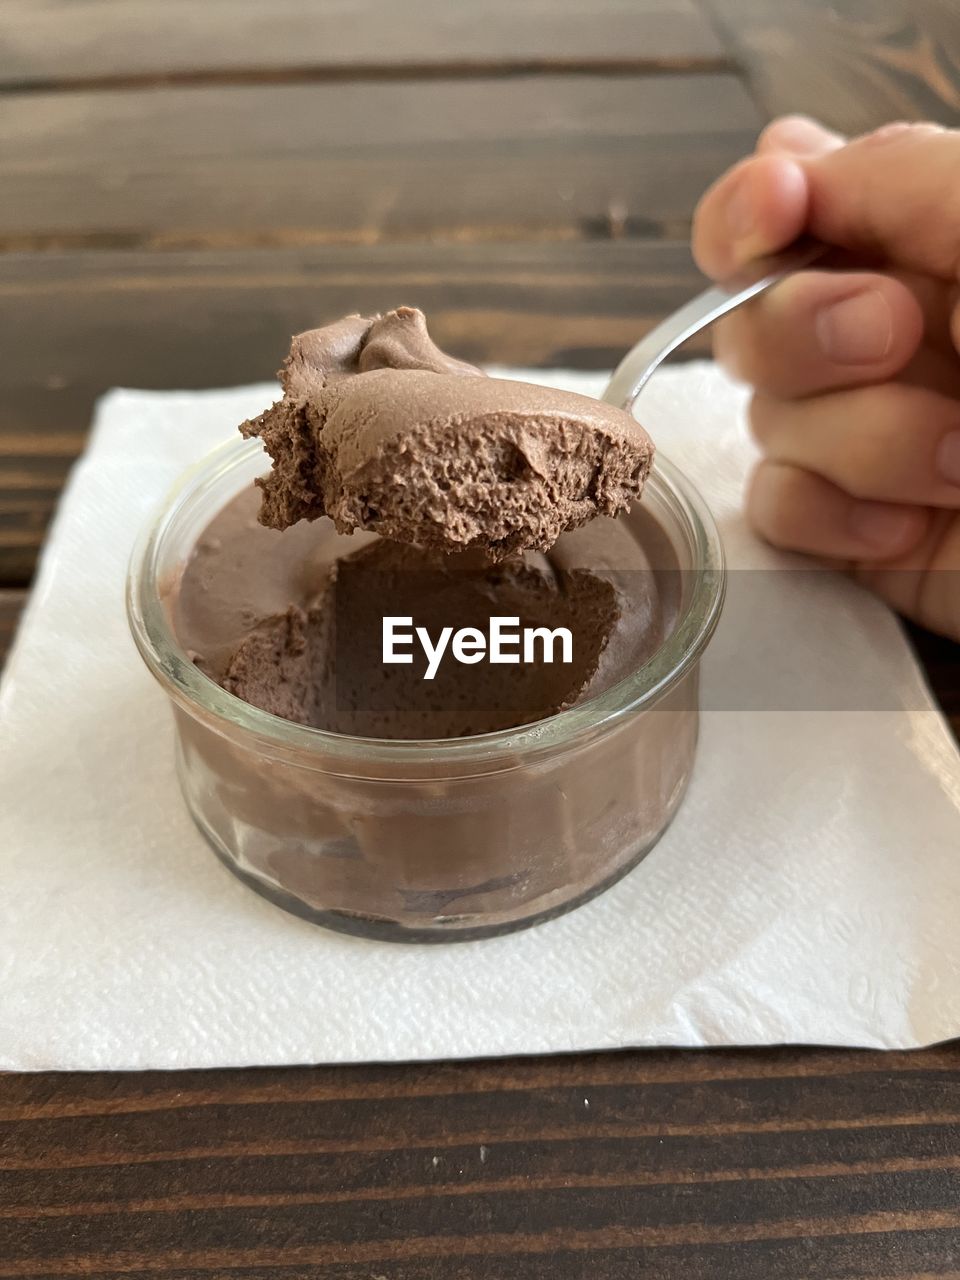 hand, food and drink, one person, ice cream, food, chocolate ice cream, holding, chocolate, wood, indoors, dessert, baked, sweet food, adult, sweet, icing, women, dairy, freshness, lifestyles, close-up, table, eating utensil, kitchen utensil, household equipment